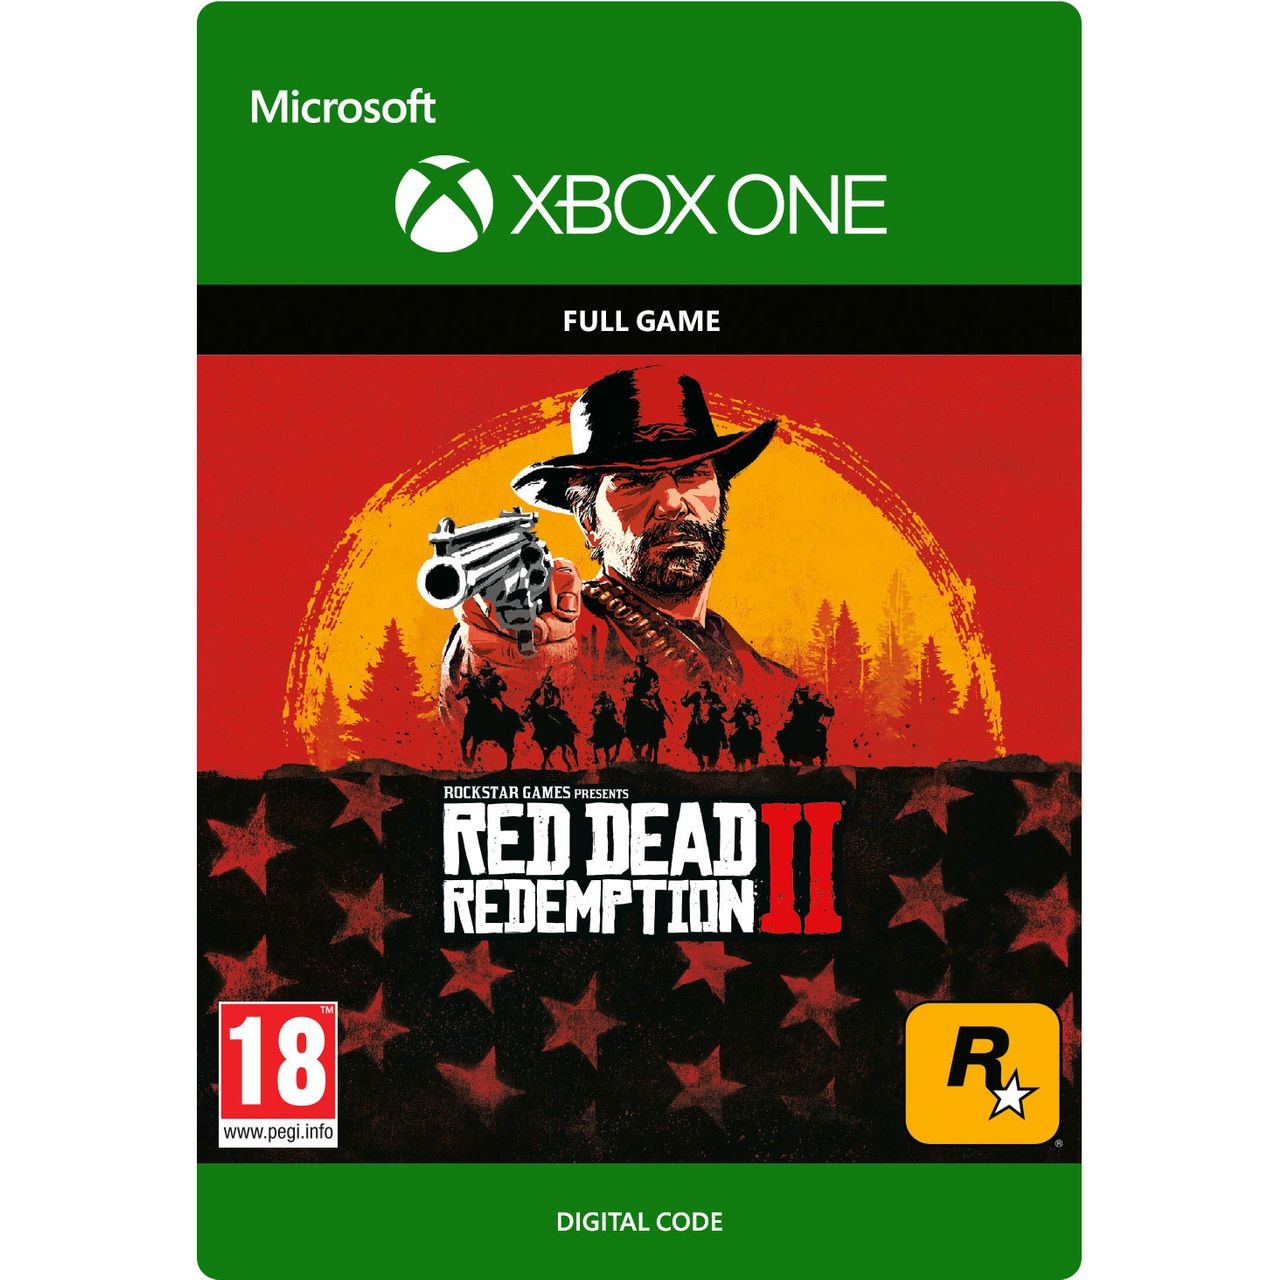 Red Dead Redemption 2 for Xbox One [Enhanced for Xbox One X] Review